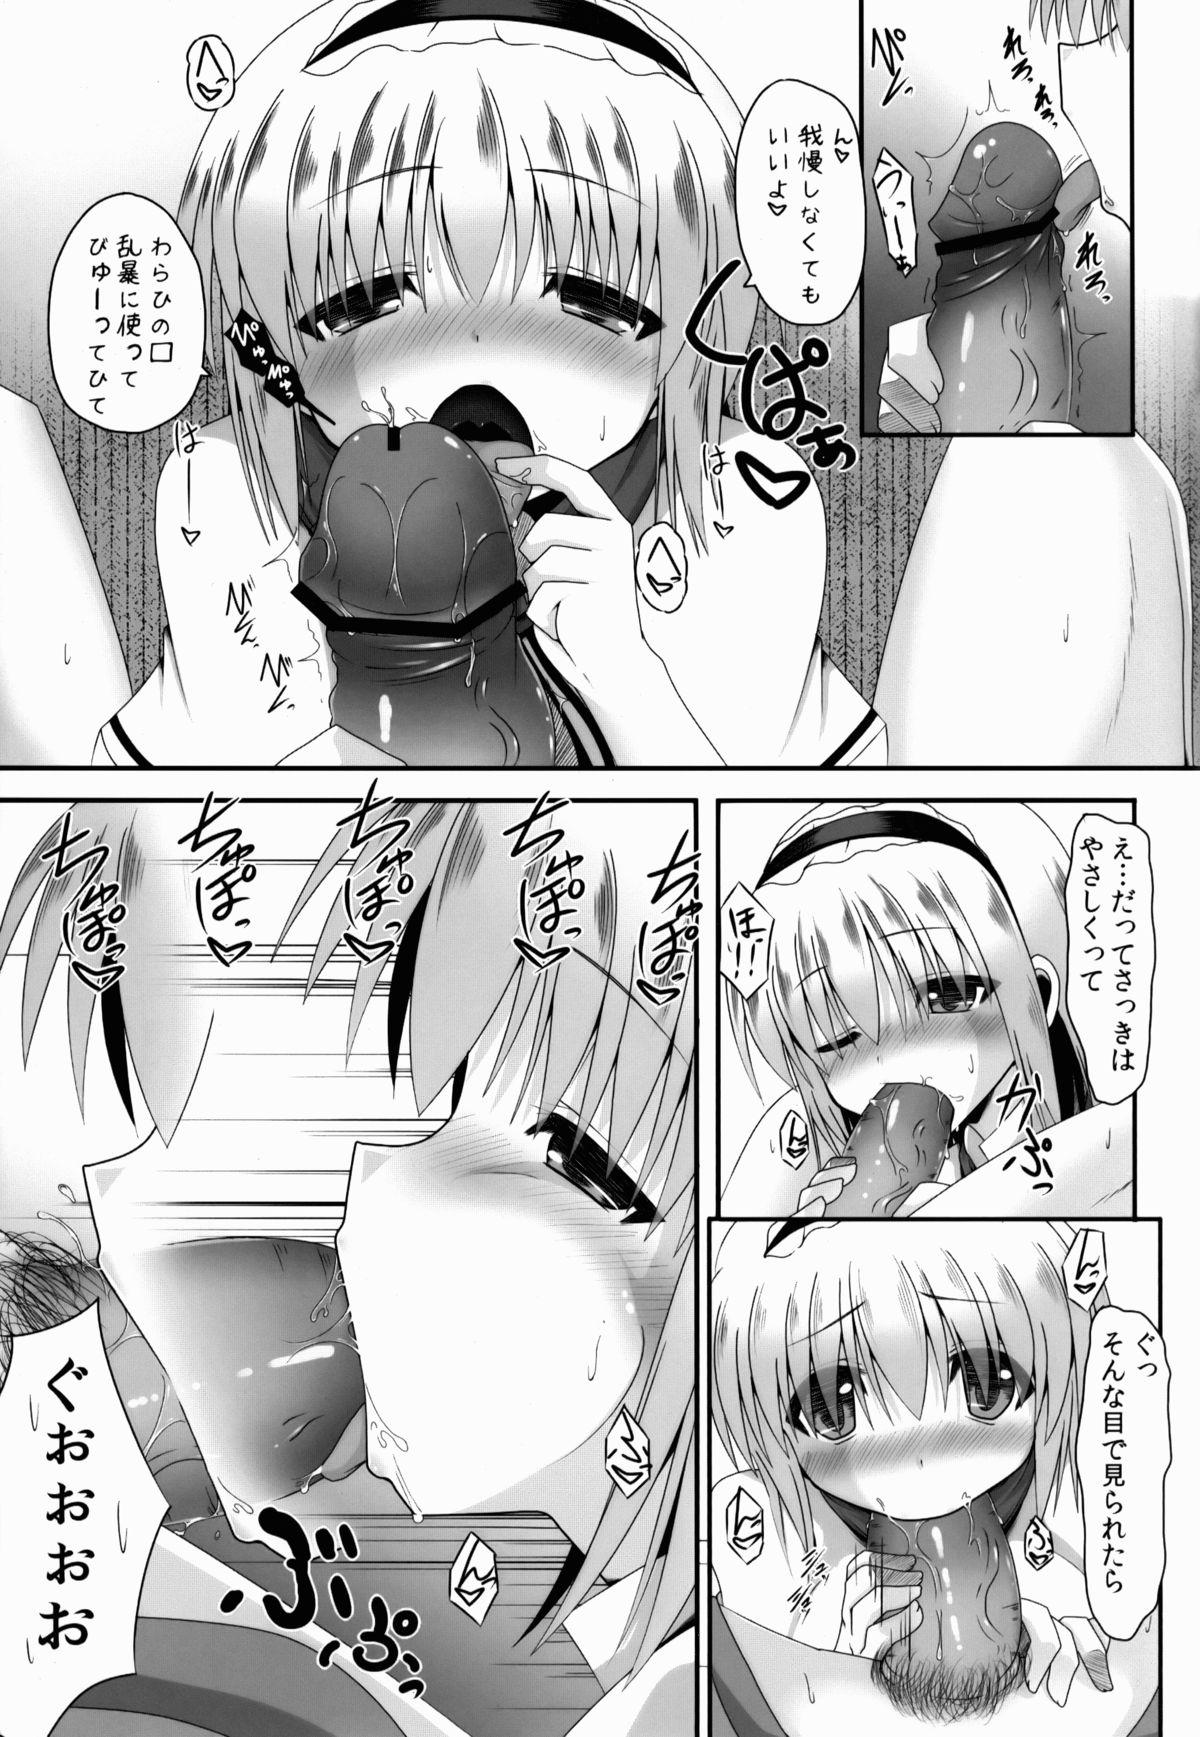 Gaysex Aidane 3 - Touhou project Nudes - Page 12